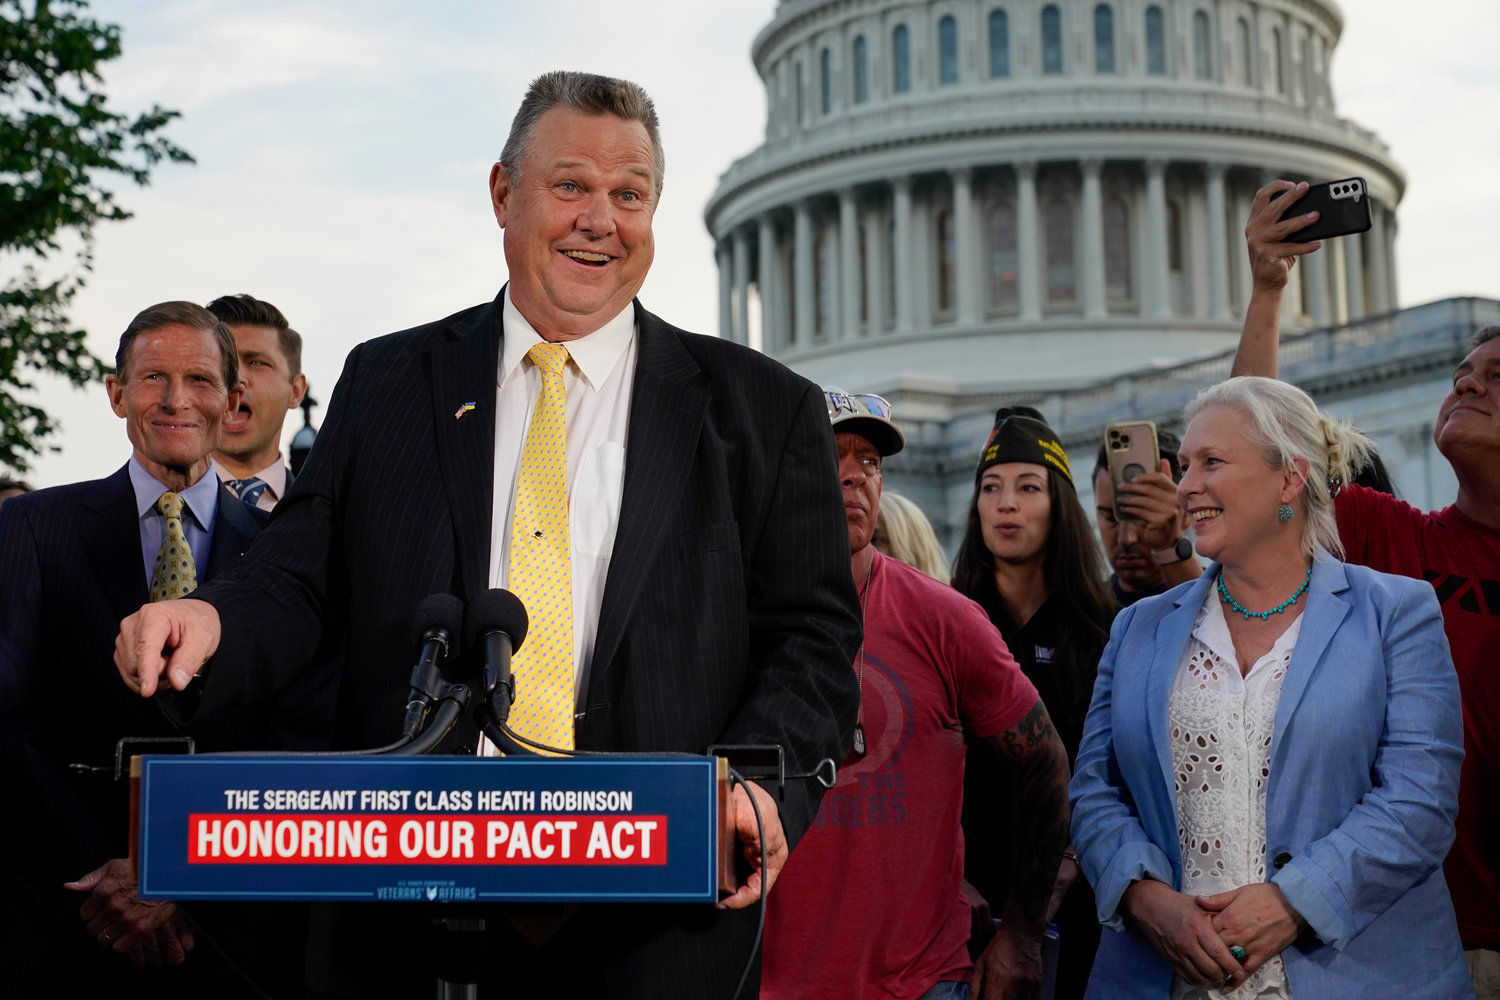 Sen. Jon Tester, D-Mont., speaks at a news conference alongside Sen. Richard Blumenthal, D-Conn., back left, and Sen. Kirsten Gillibrand, D-N.Y., after the Senate passed a bill designed to help millions of veterans exposed to toxic substances during their military service, Aug. 2, 2022, on Capitol Hill in Washington.